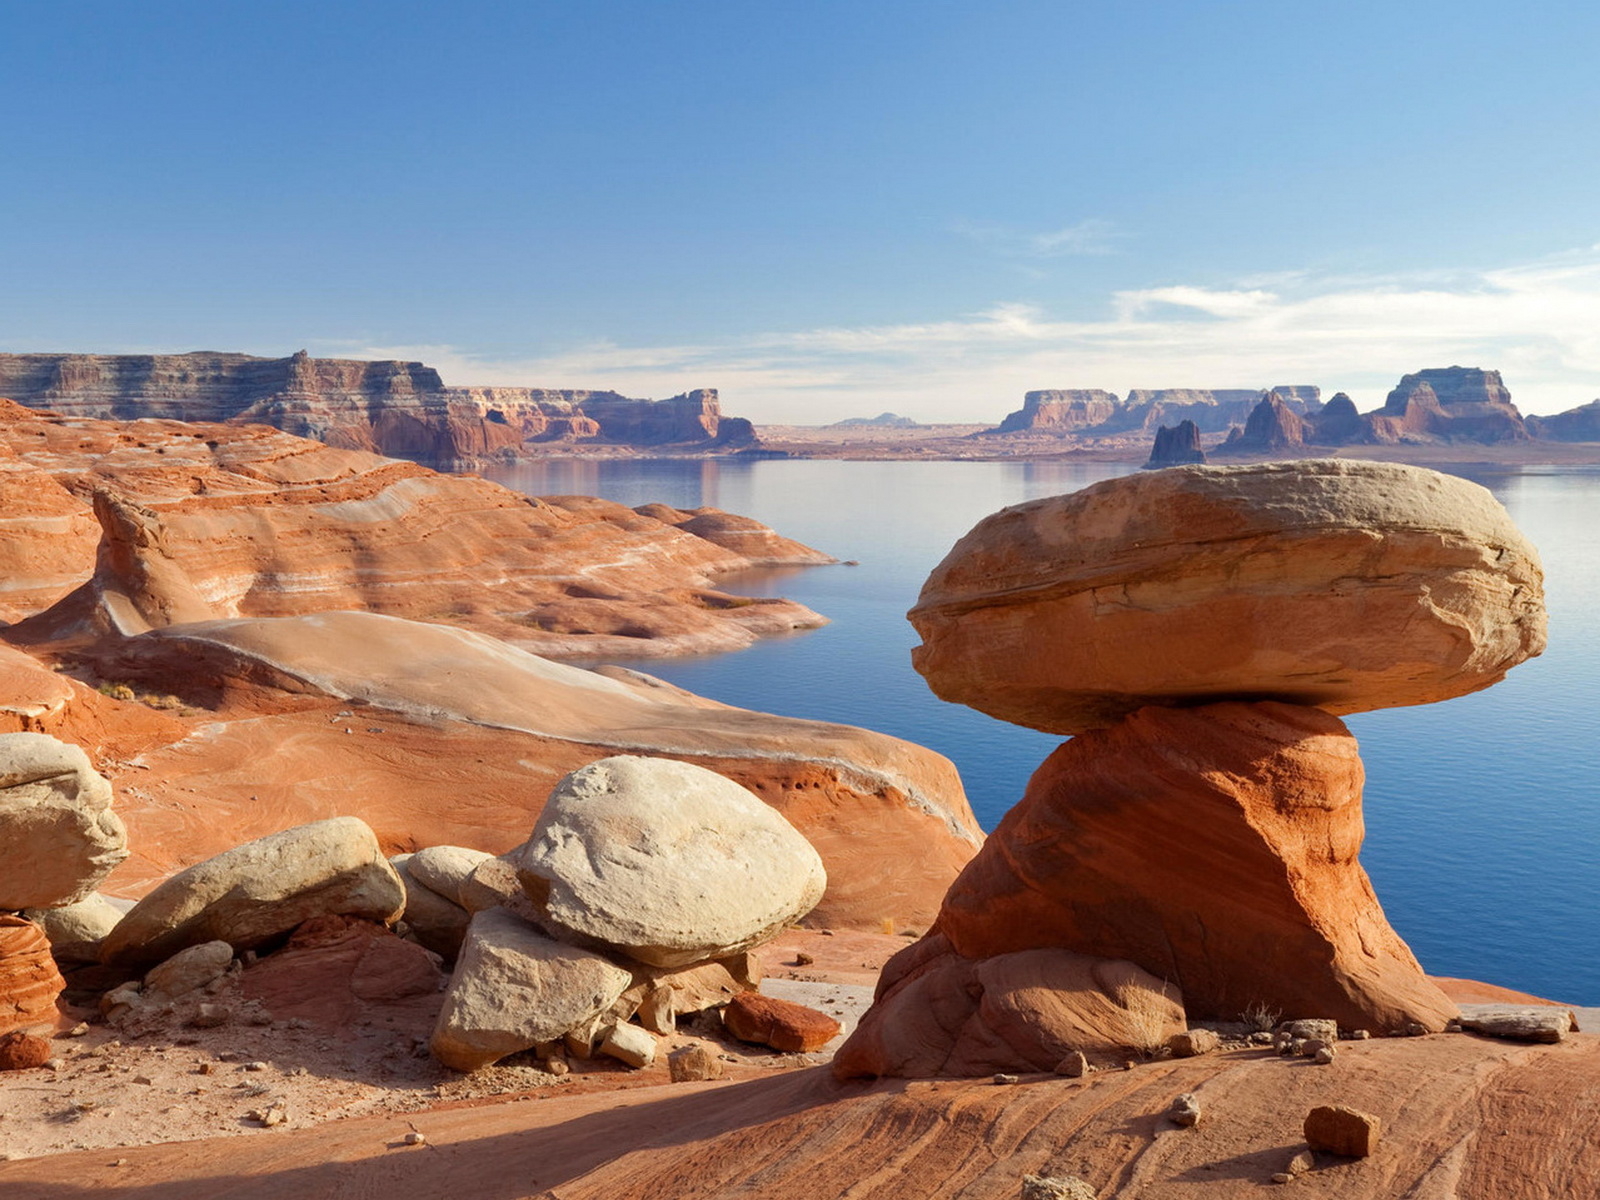 Utah mountain lake Powell wallpapers and images   wallpapers 1600x1200